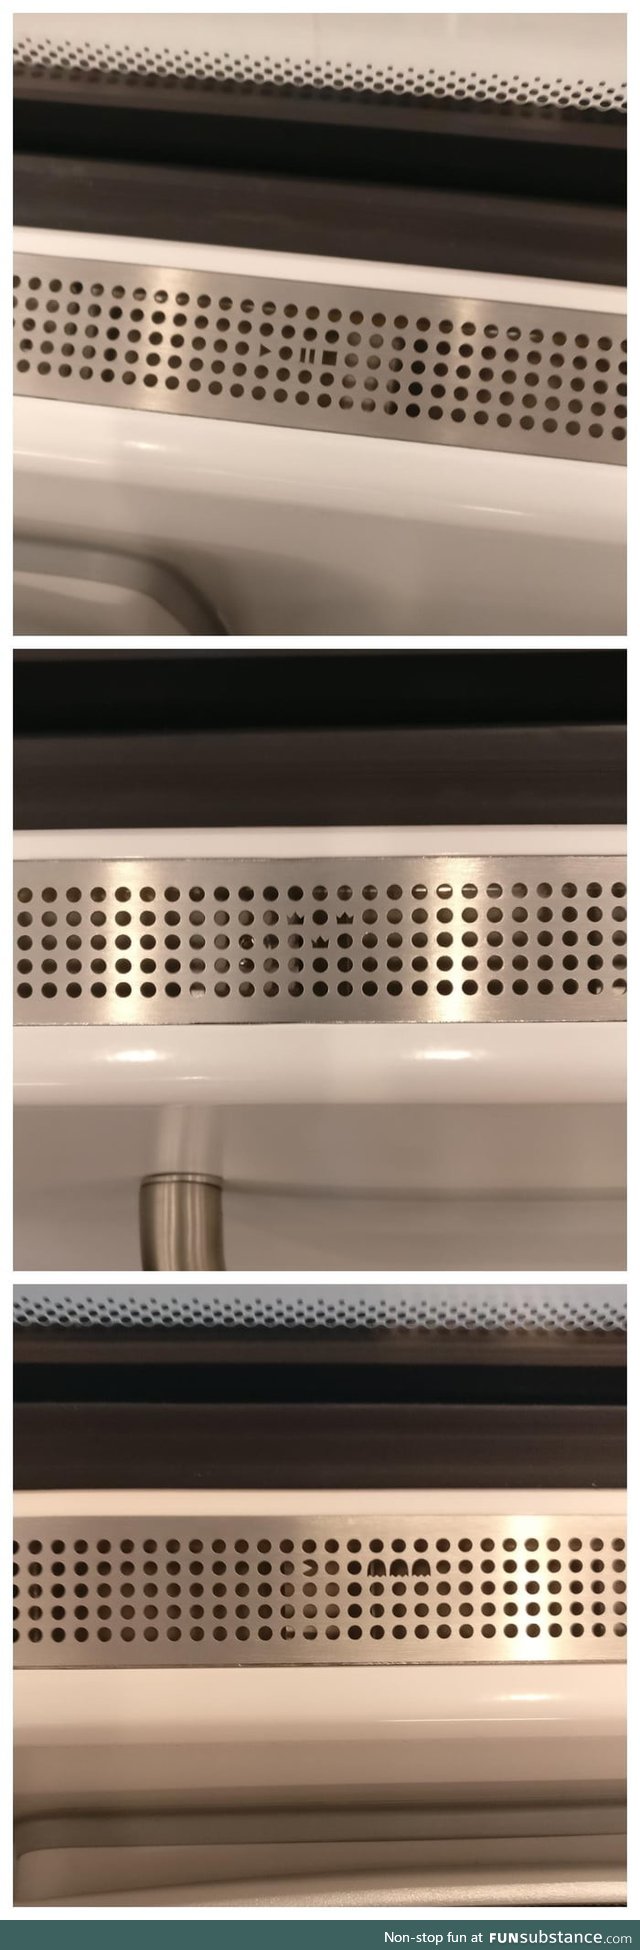 Patterns on the air vents from the new trains in Sweden